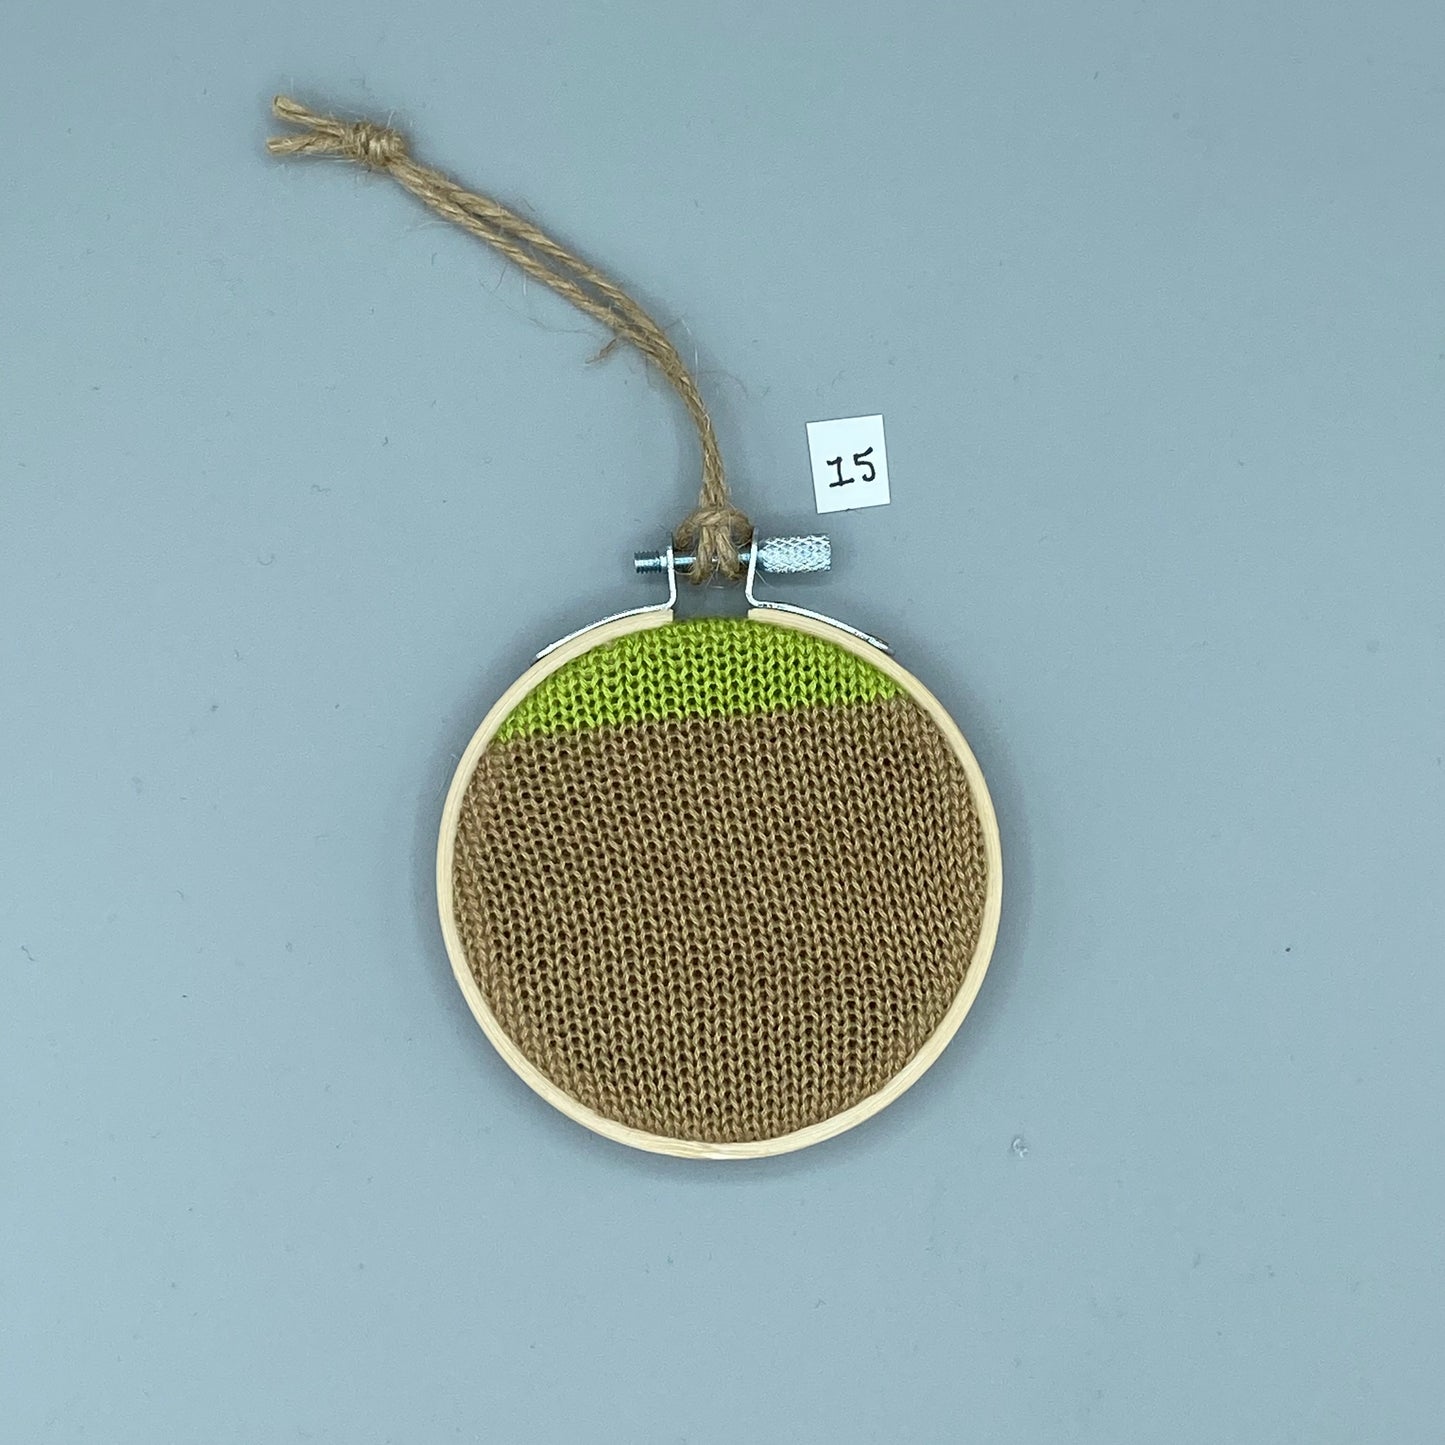 Knit Swatch Ornament/Wall Hanging